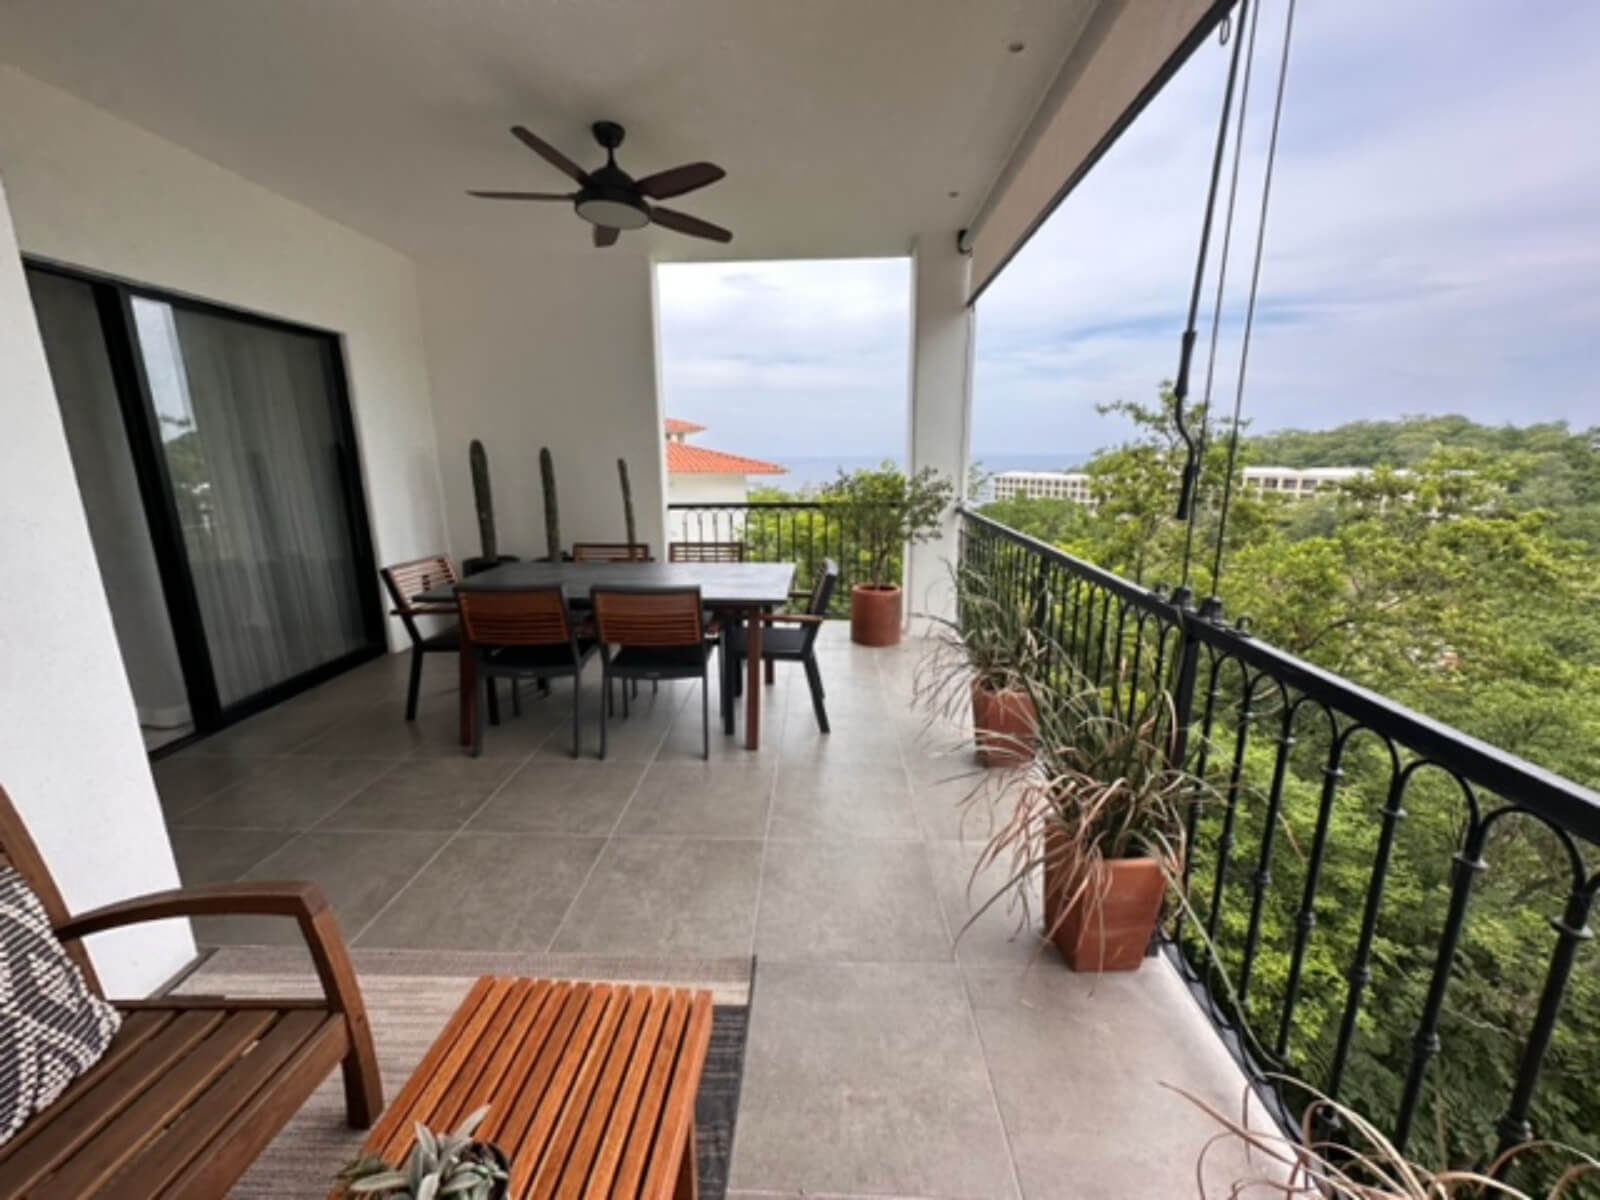 Loft with floor-to-ceiling window and double height, 650 meters from the sea, infinity pool, gym, barbecue area, pre-construction, for sale